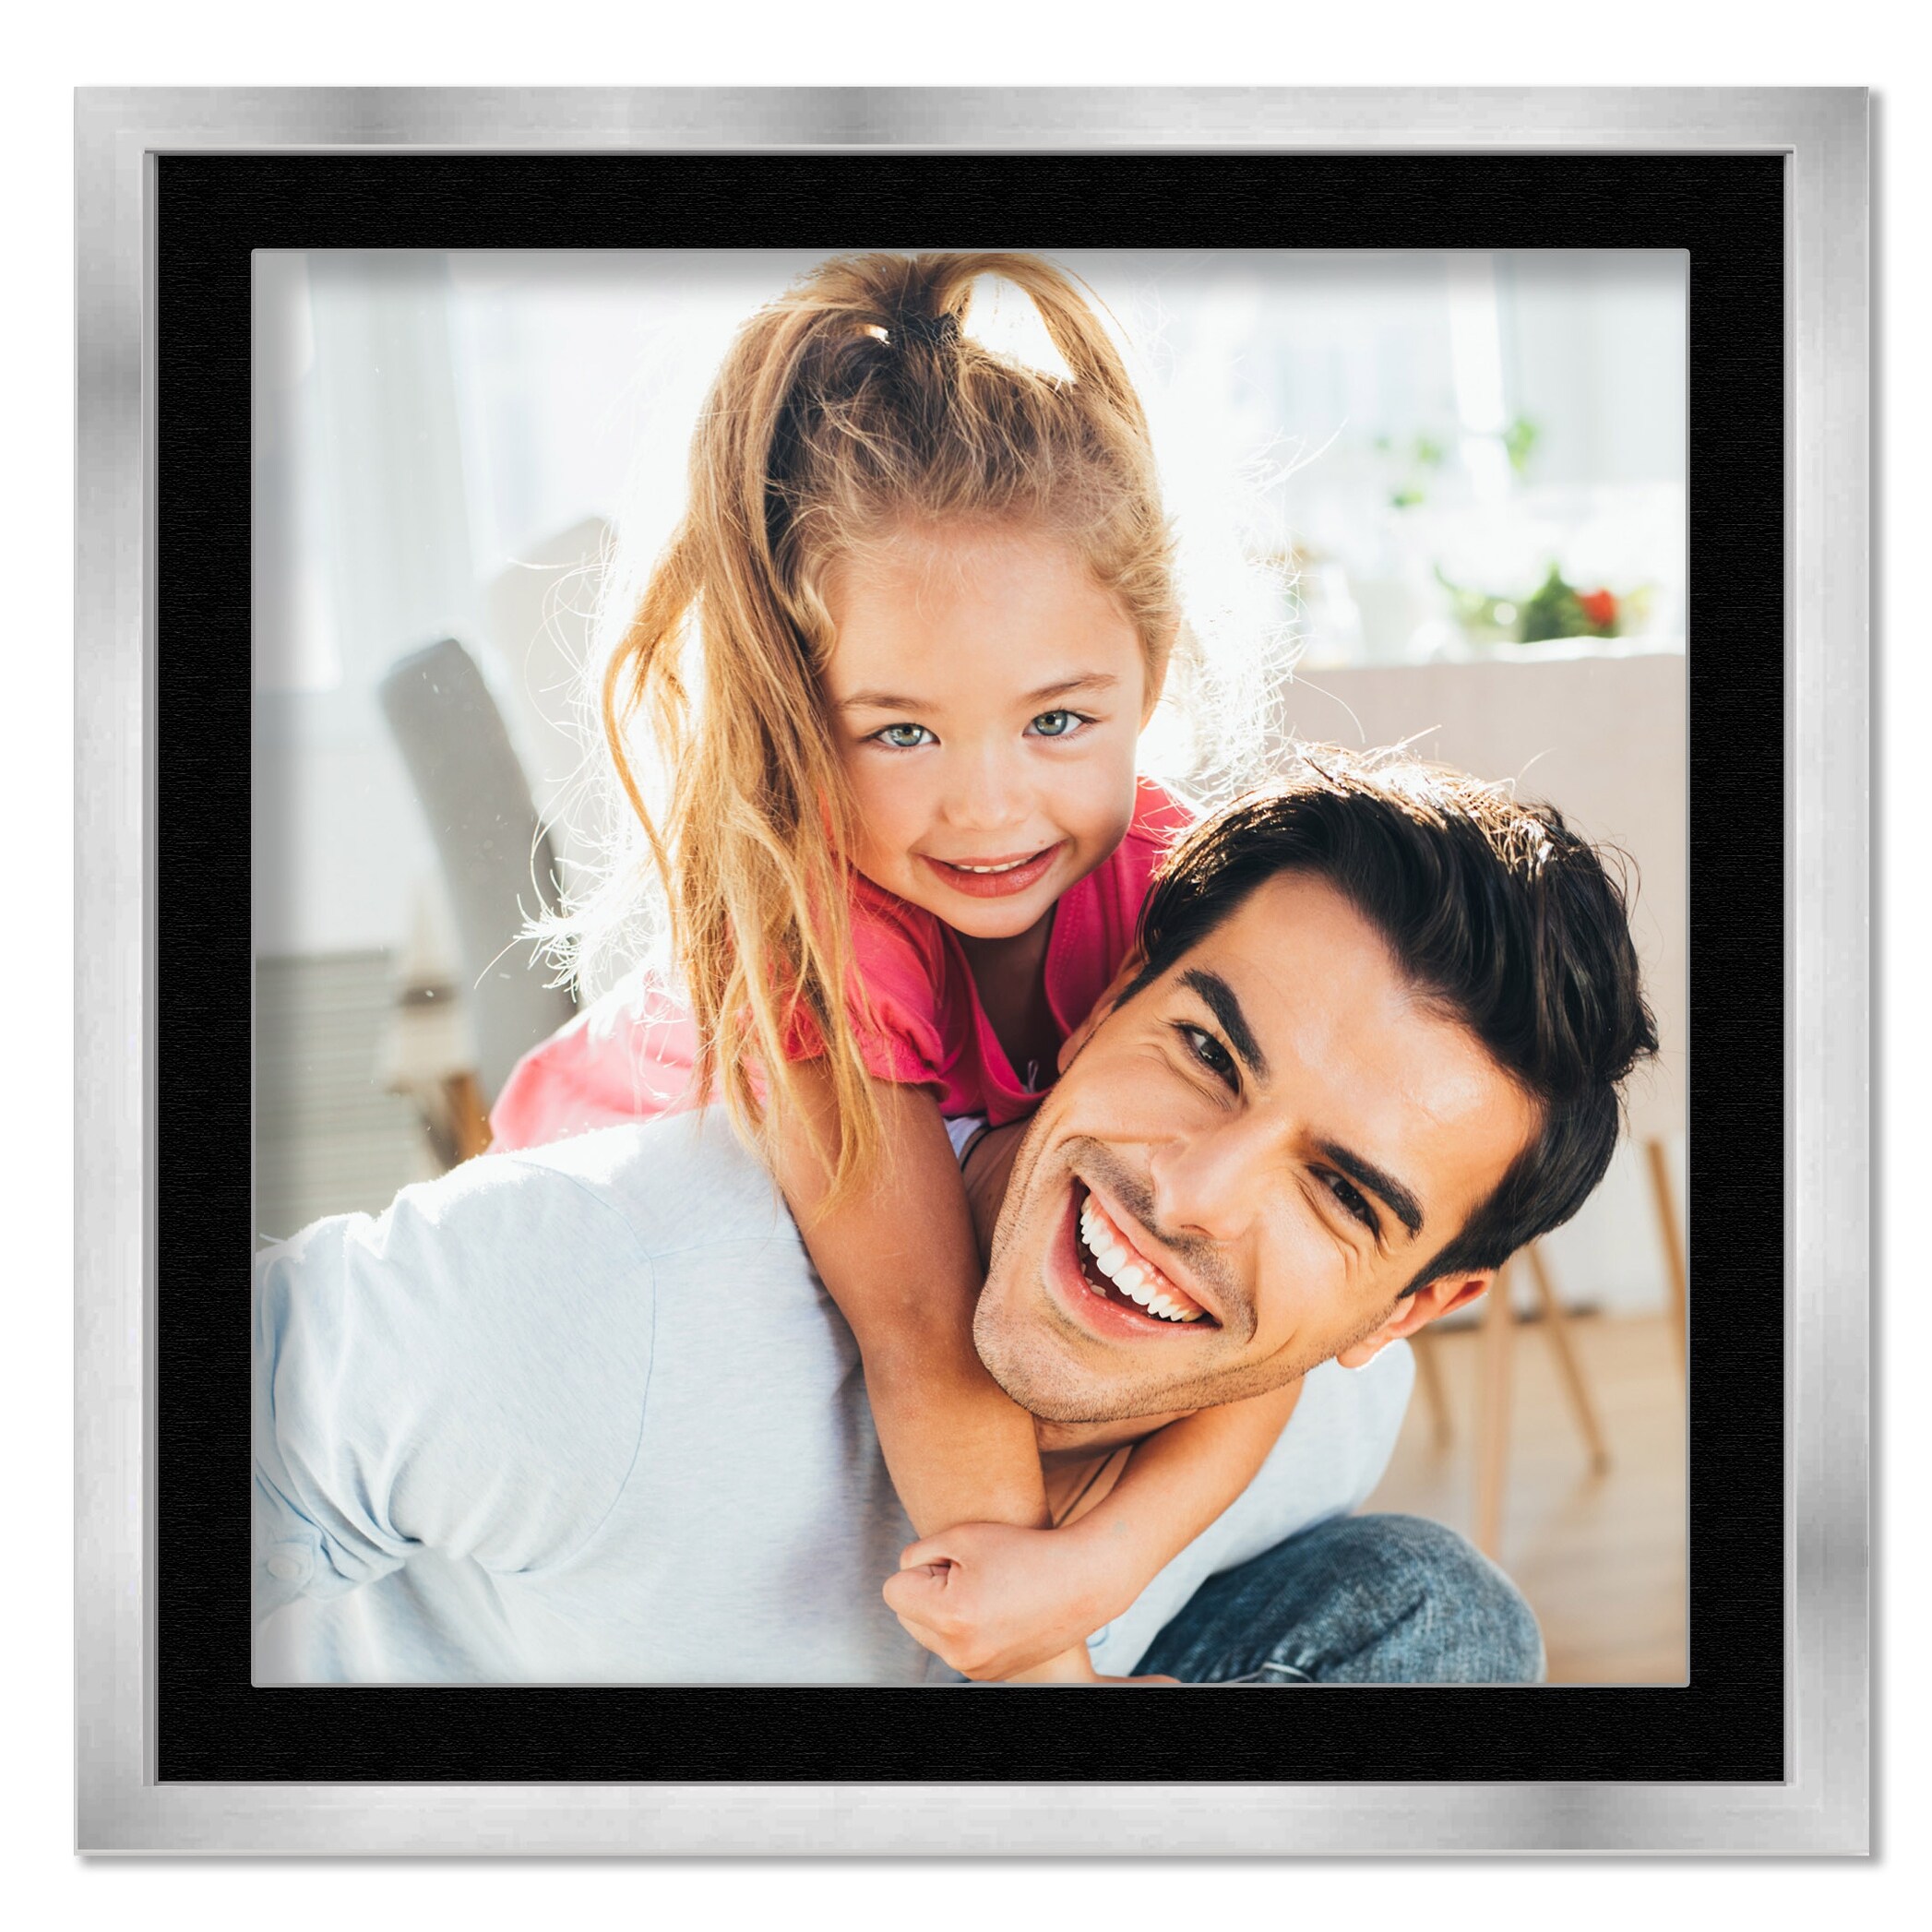 12x12 Frame with Mat - White 15x15 Frame Wood Made to Display Print or Poster Measuring 12 x 12 Inches with White Photo Mat